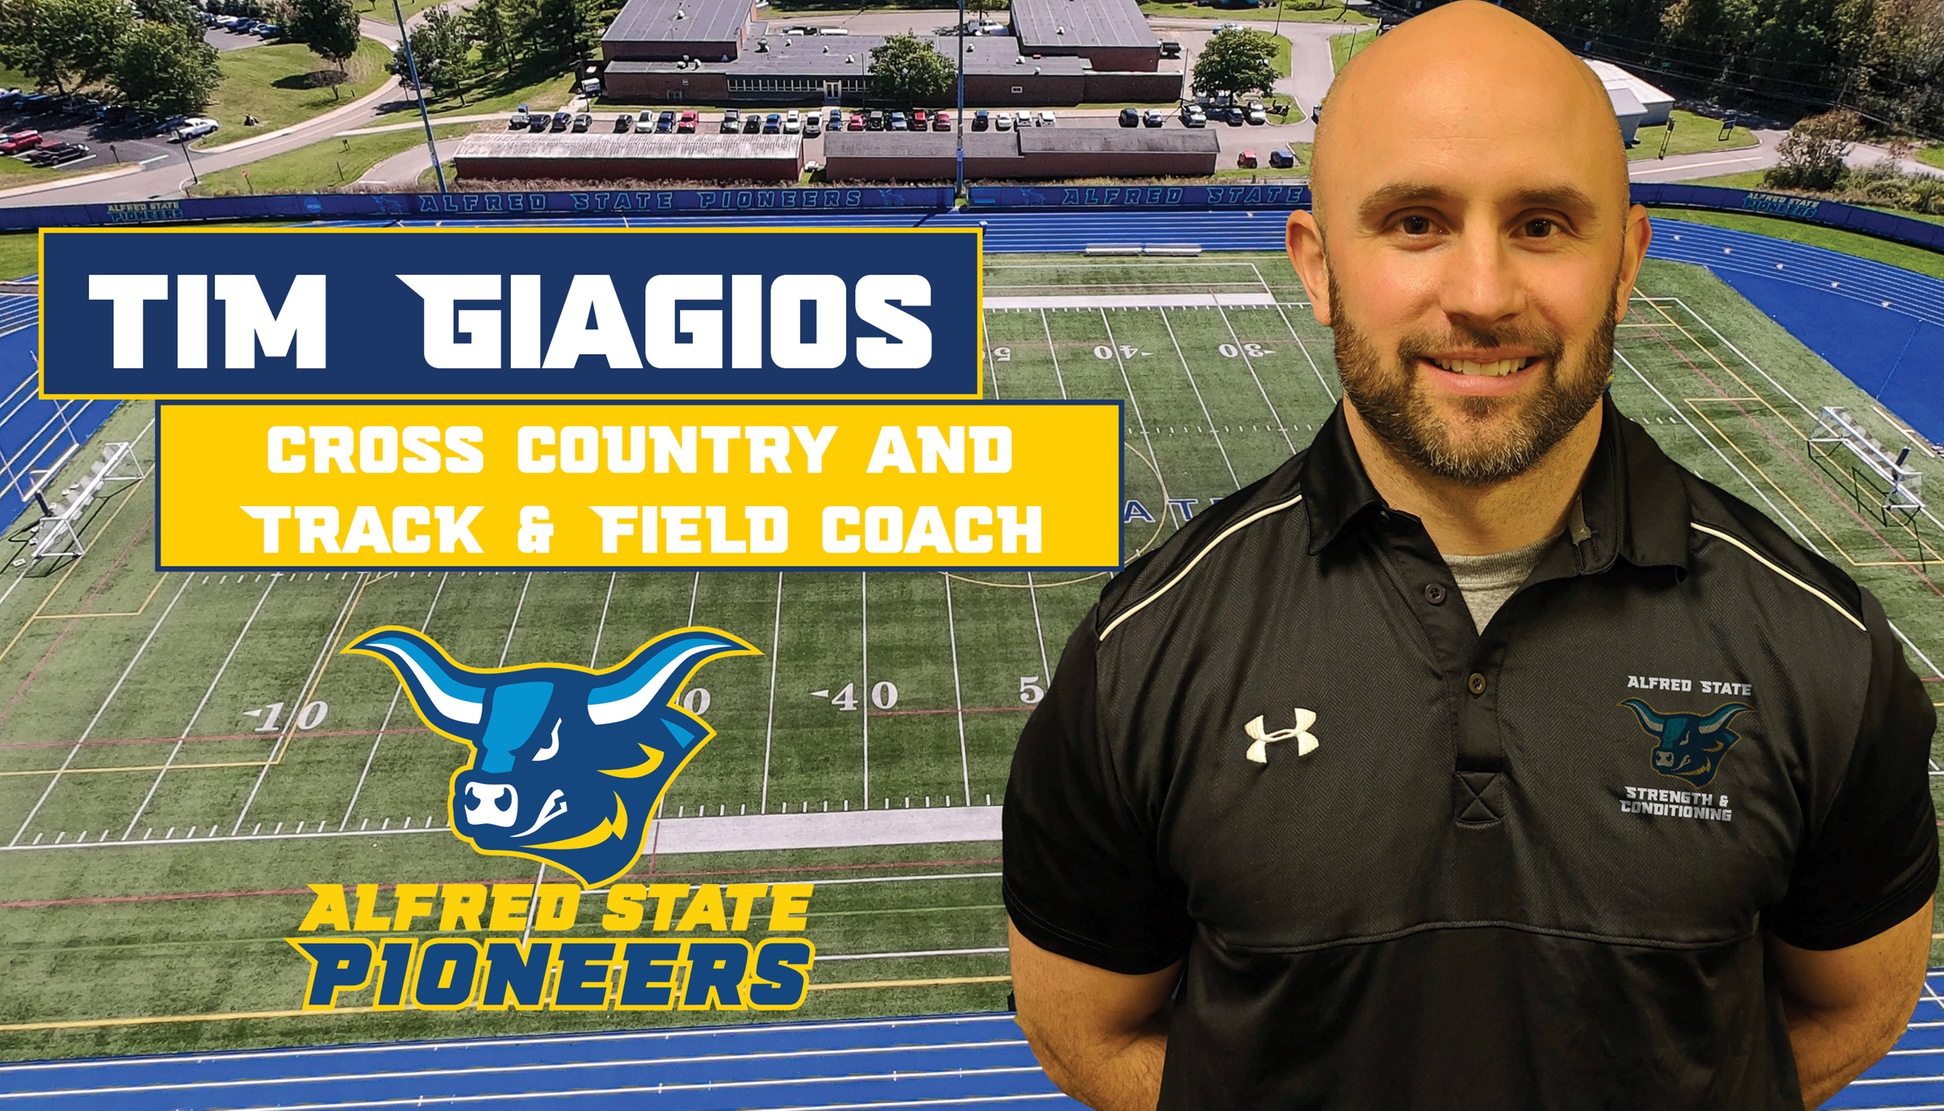 Tim Giagios named Cross Country and Track & Field Coach